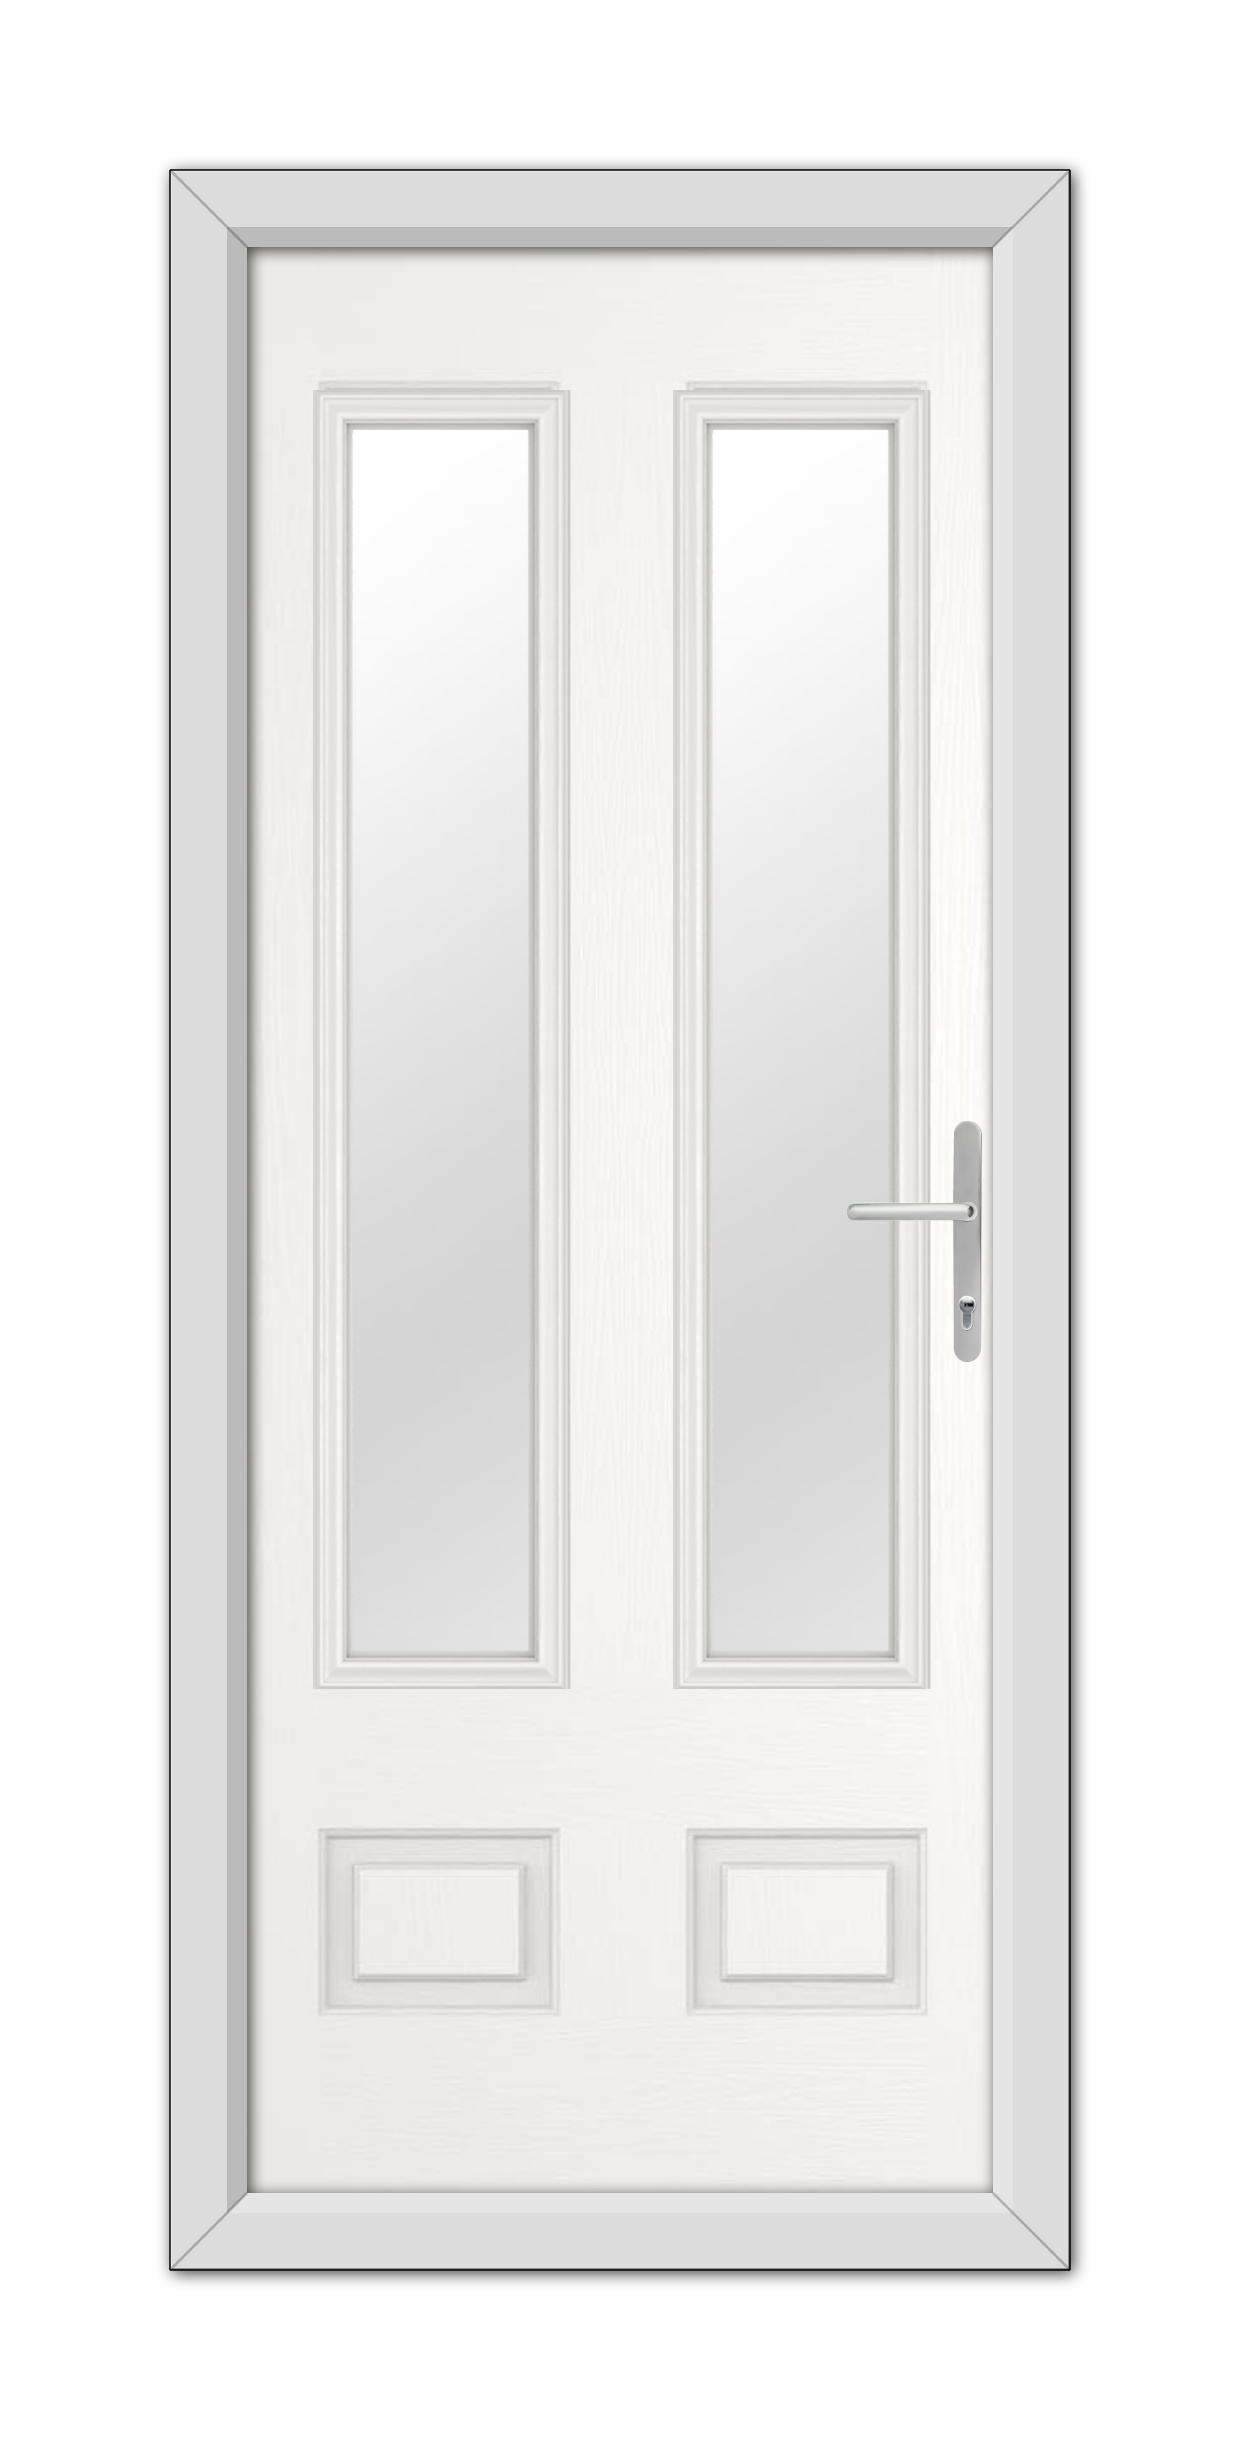 White Aston Glazed 2 Composite Door 48mm Timber Core double doors with a modern handle and glass panels, set within a simple frame, viewed from the front.